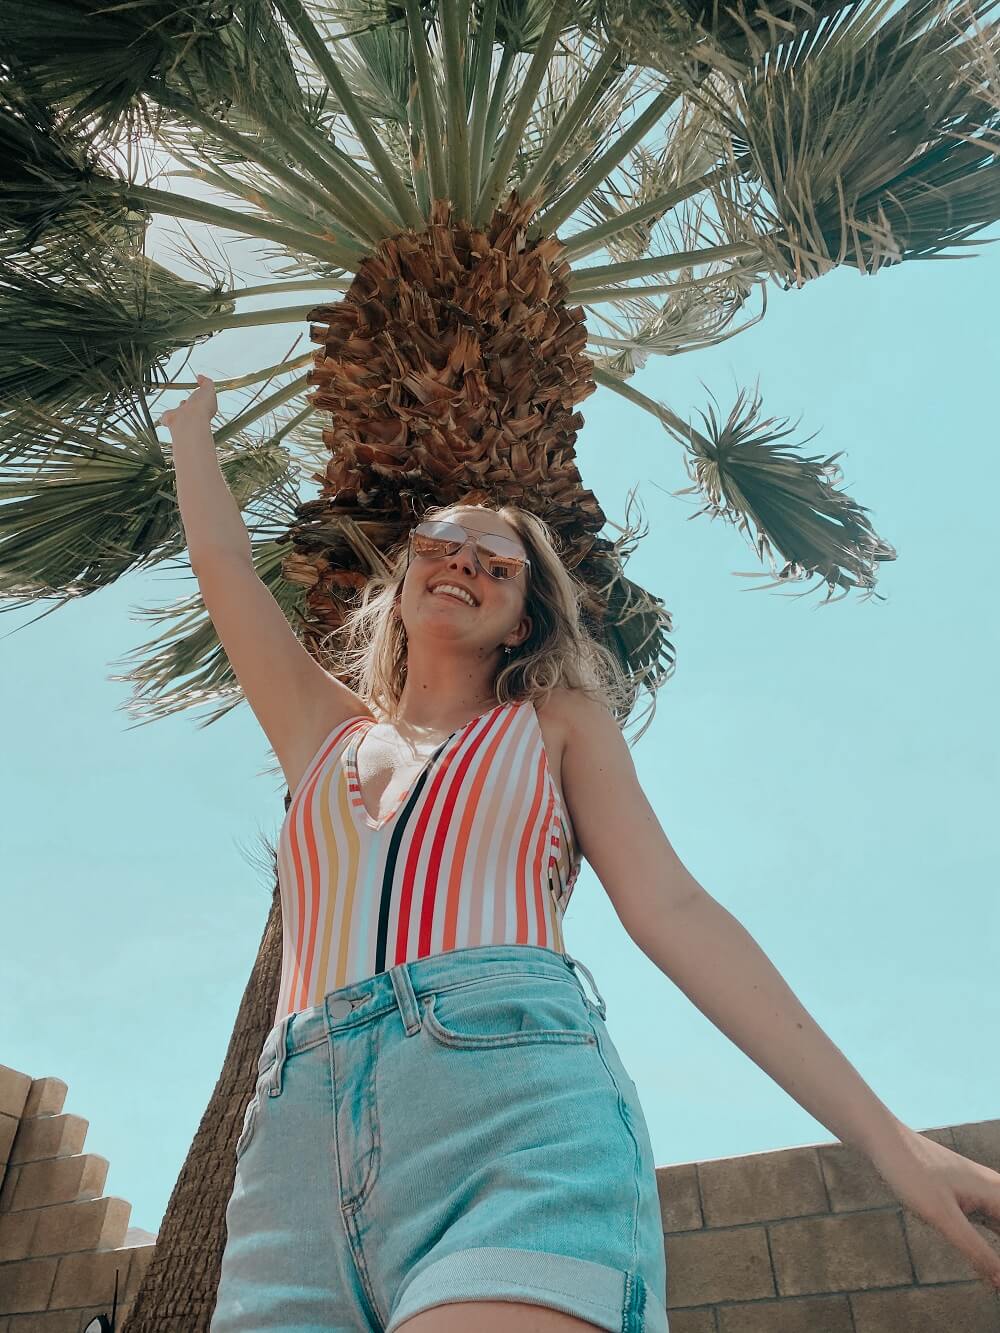 Posing in front of a palm tree protected from the sun with her beauty essentials